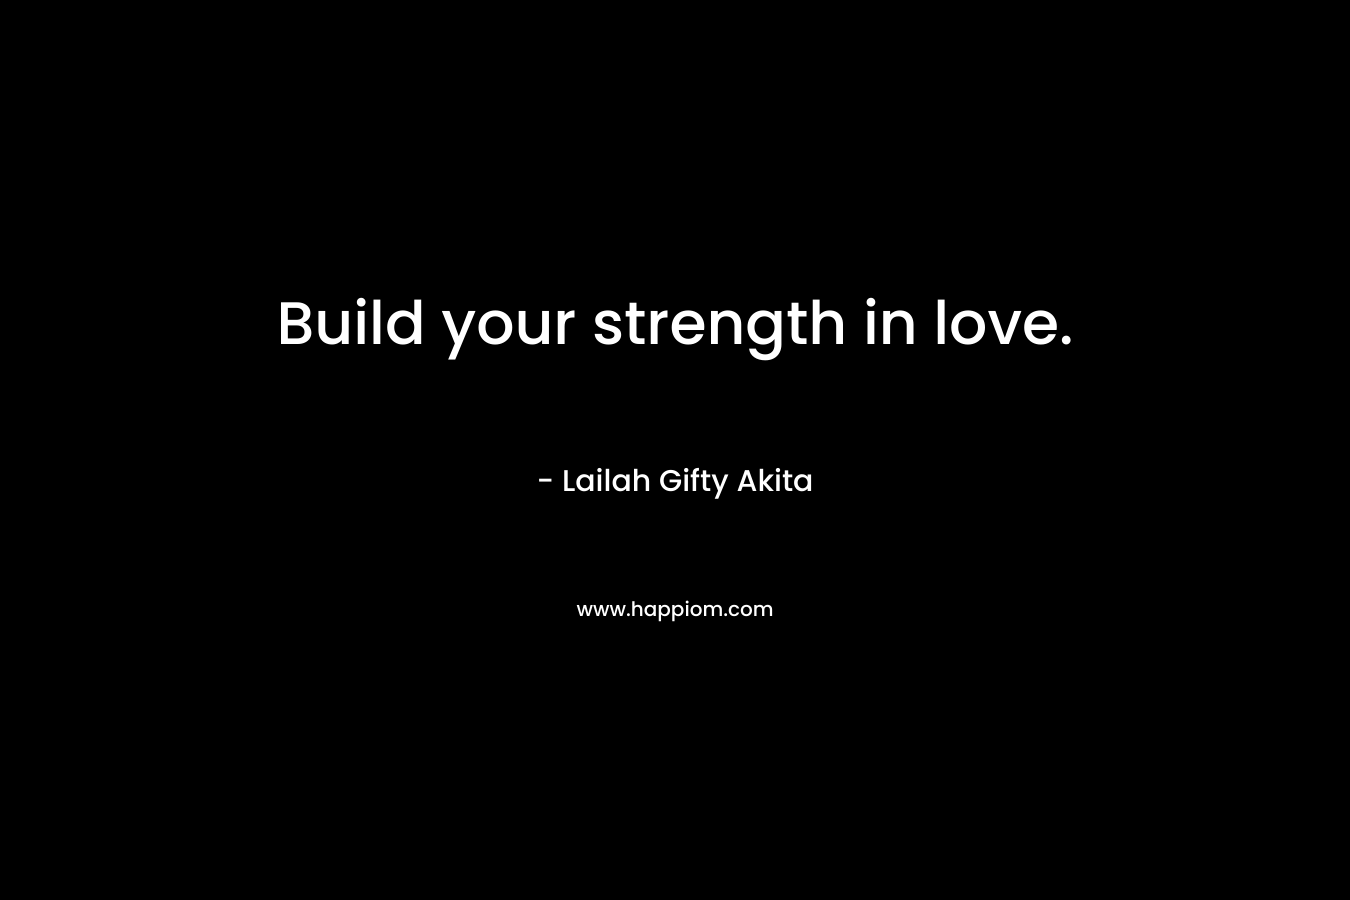 Build your strength in love.